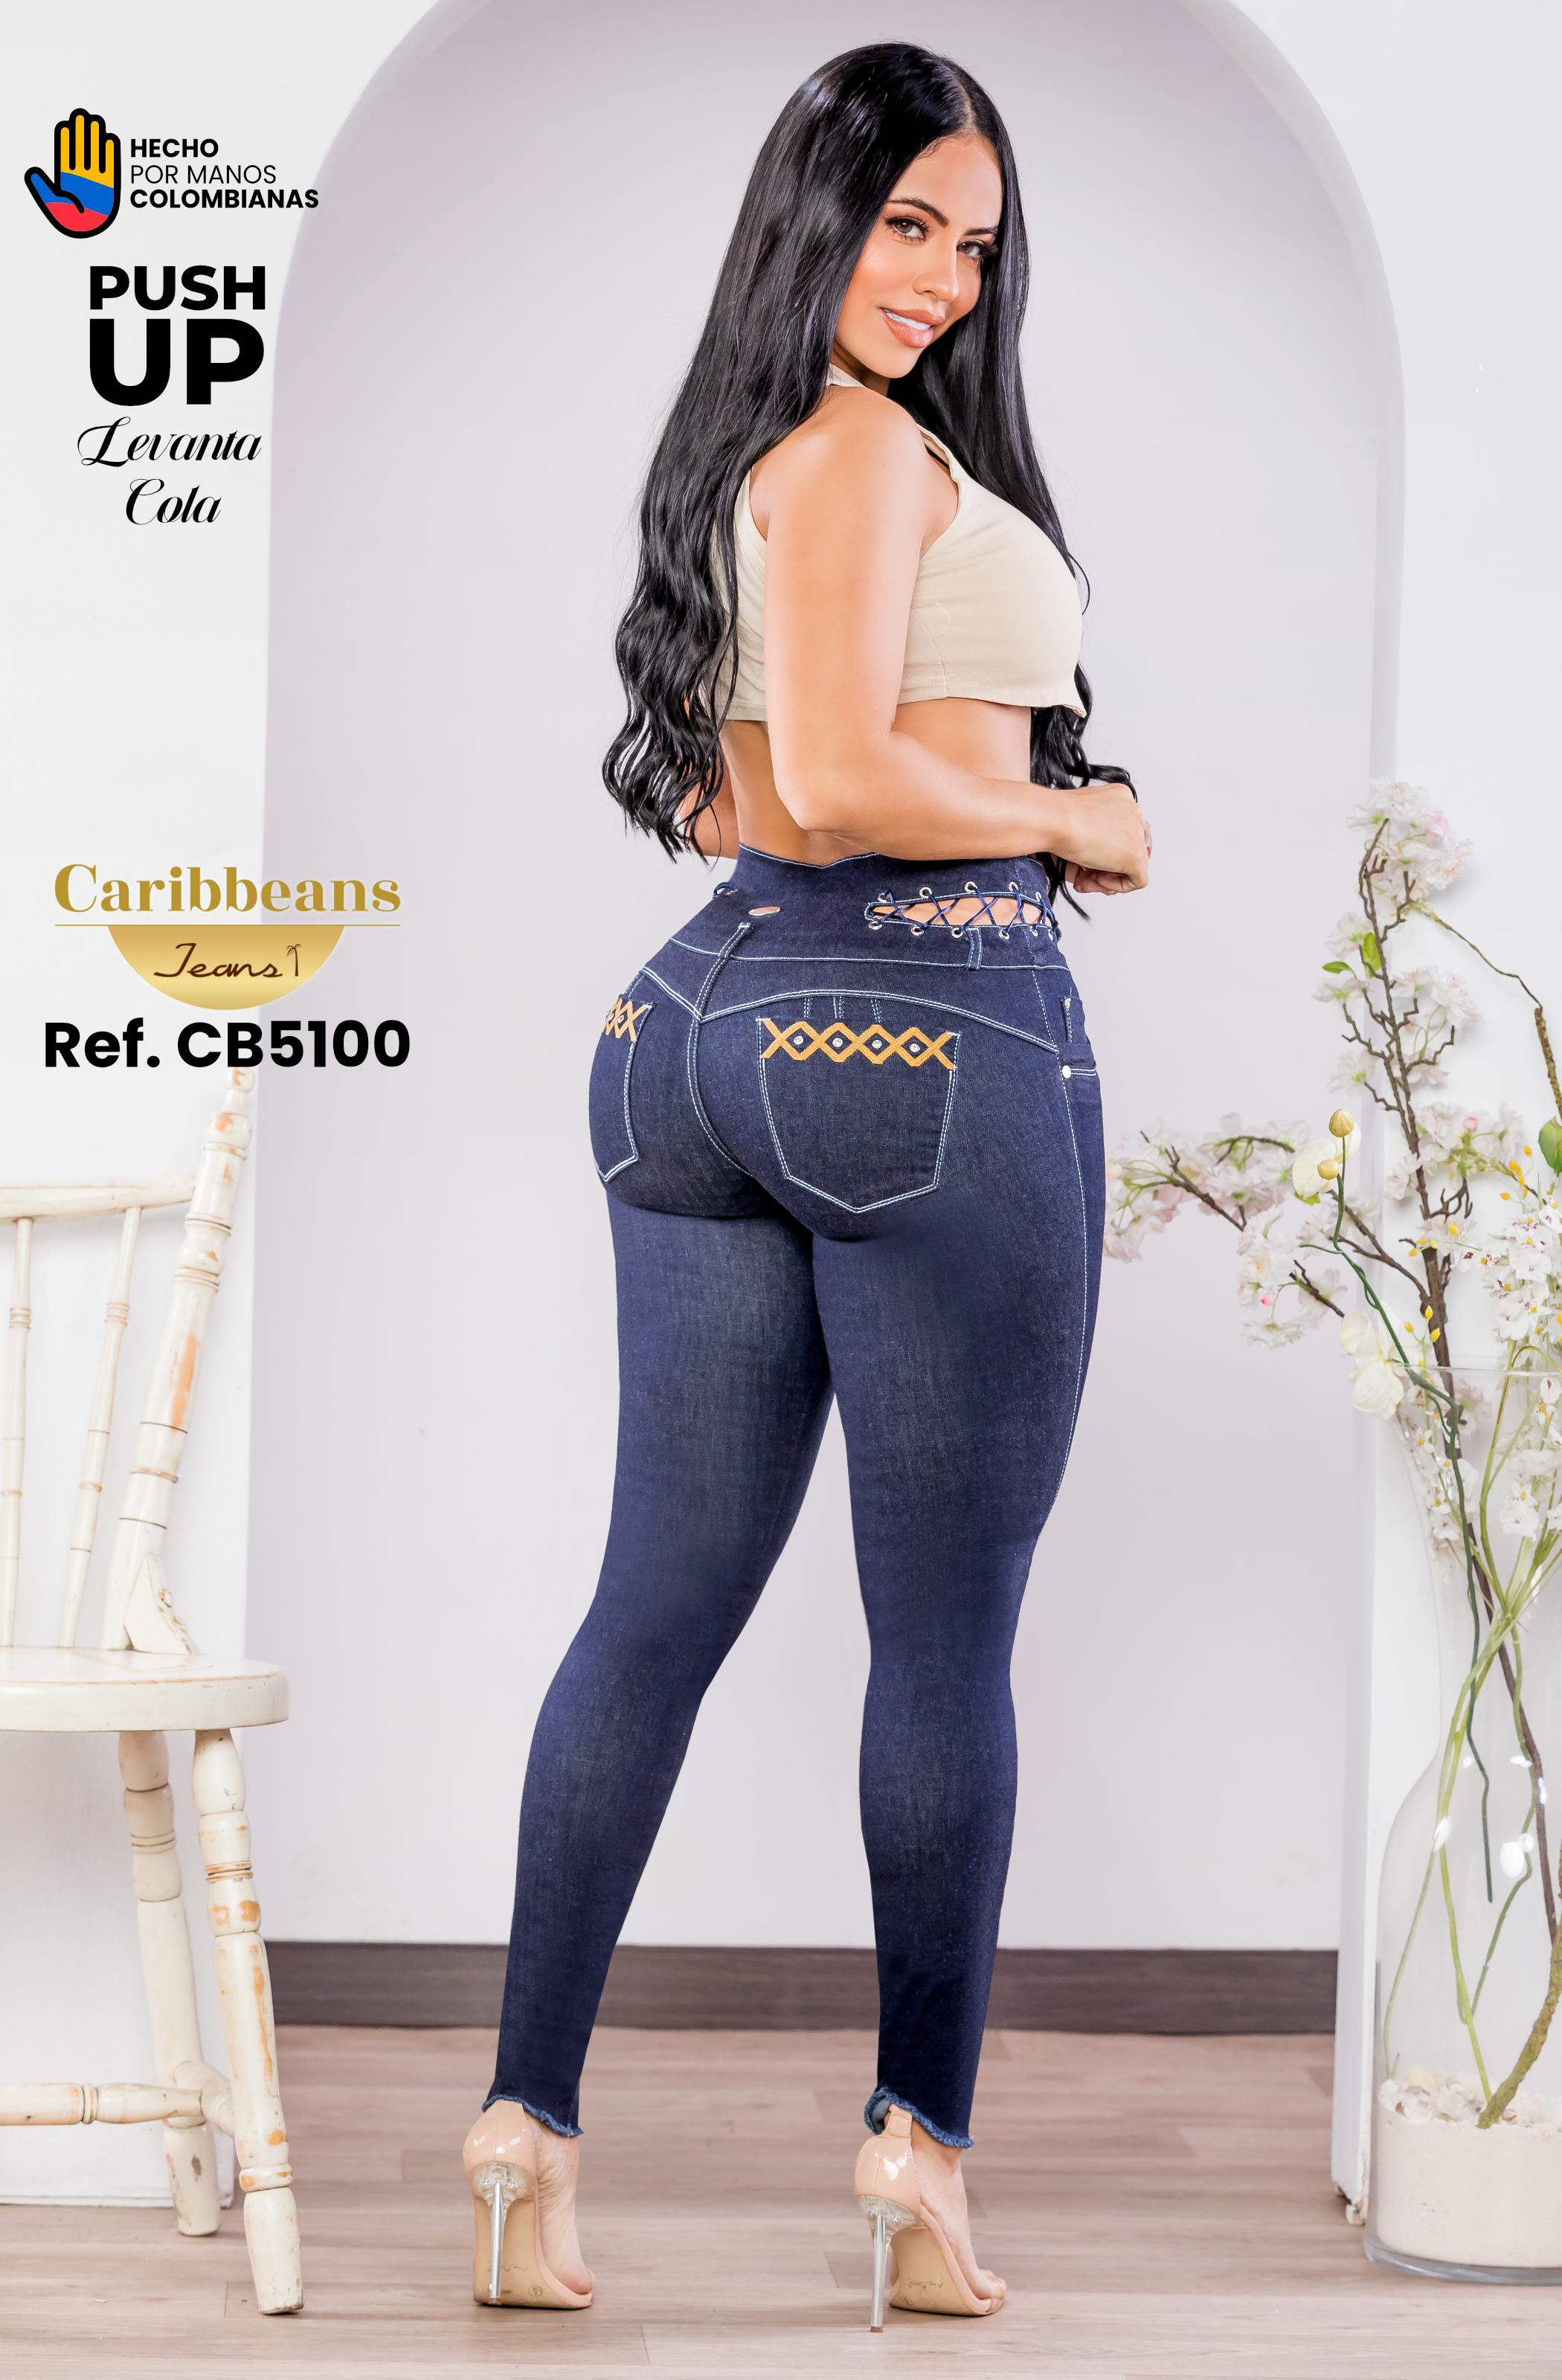 Colombian jeans push up